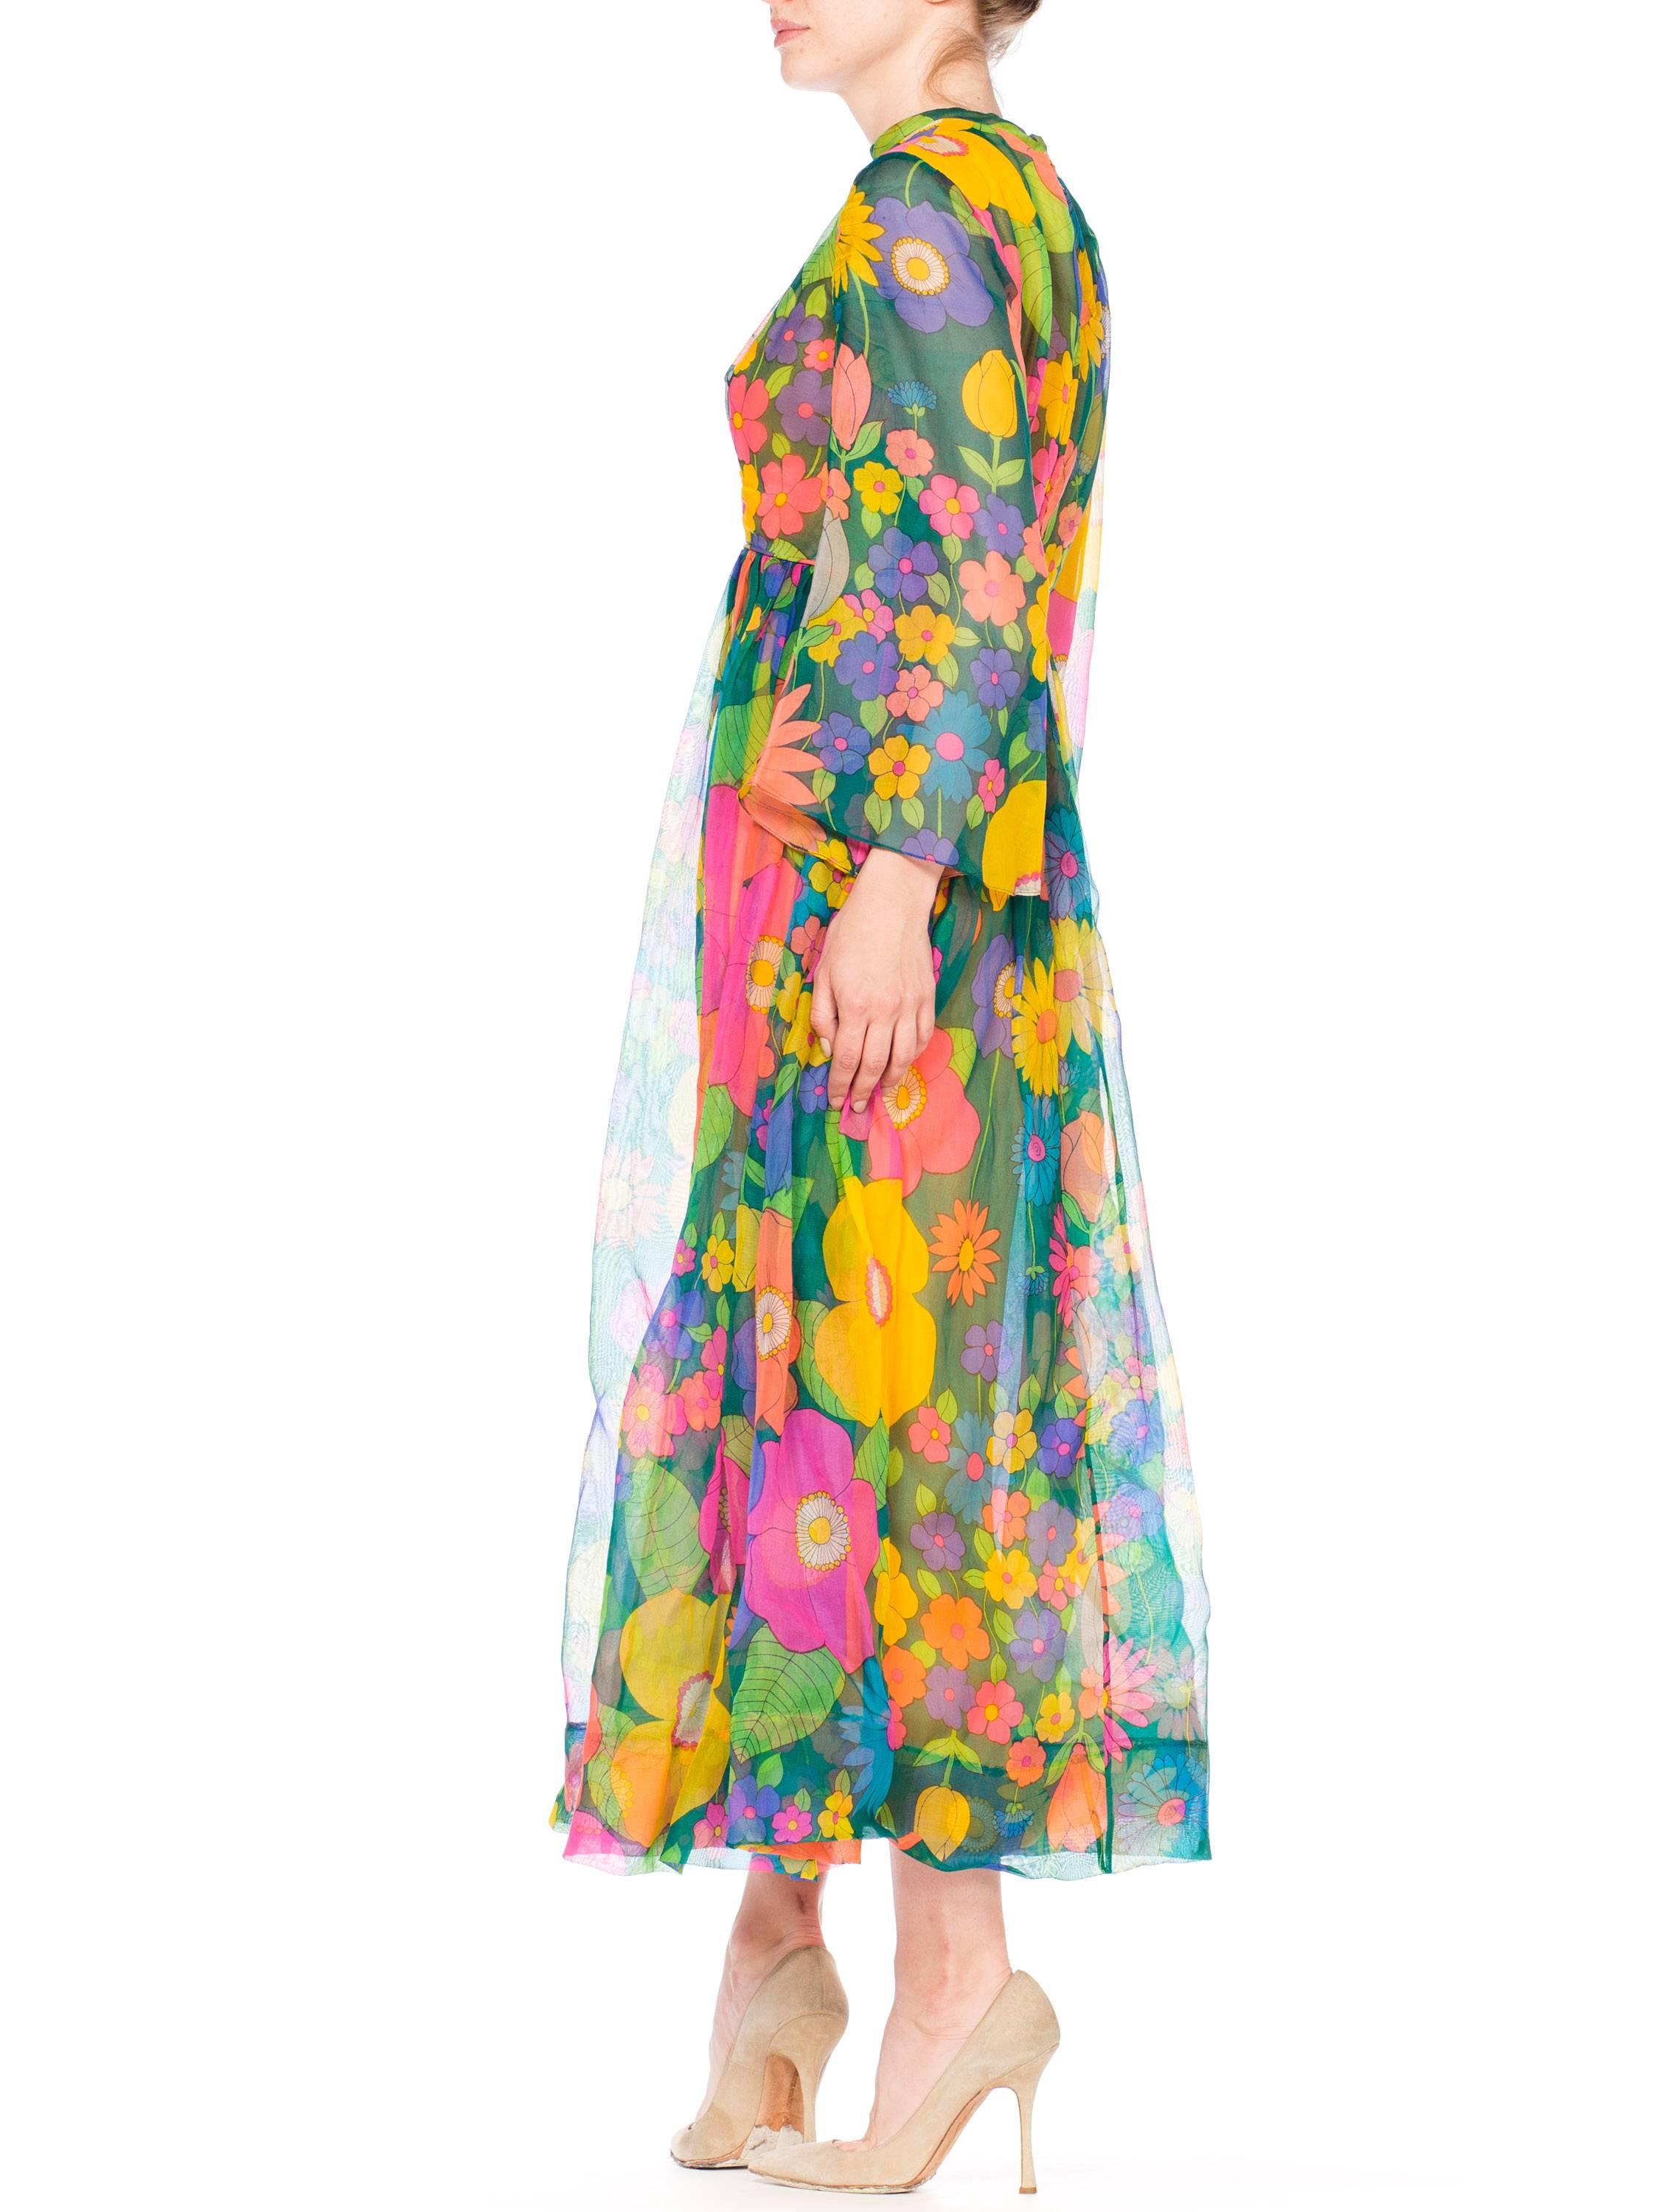 1960s 1970s Floral Print Dress with Bell Sleeves 6